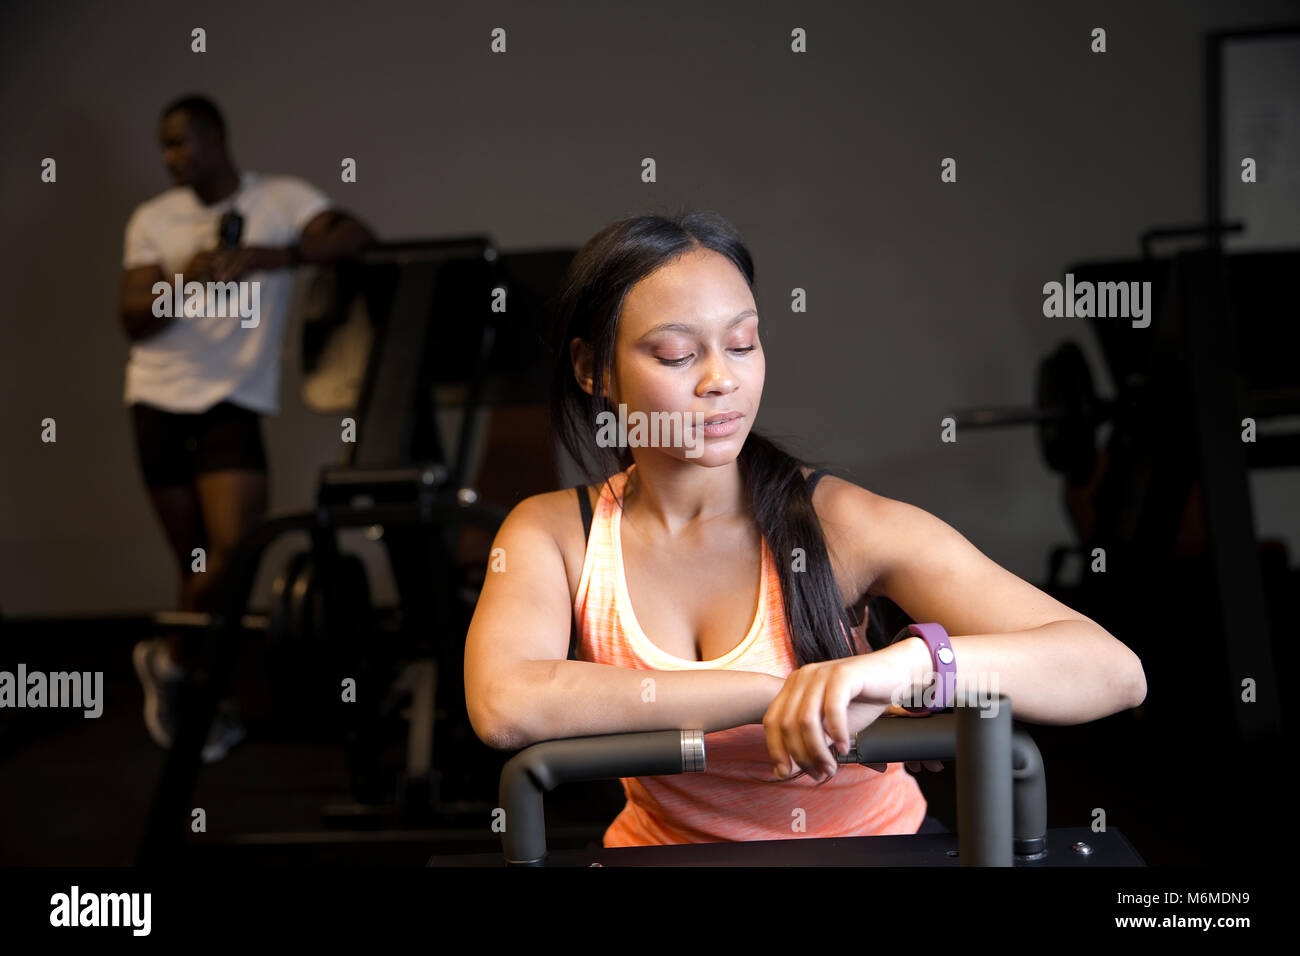 Mixed Race woman looking at smart watch in gymnasium Banque D'Images